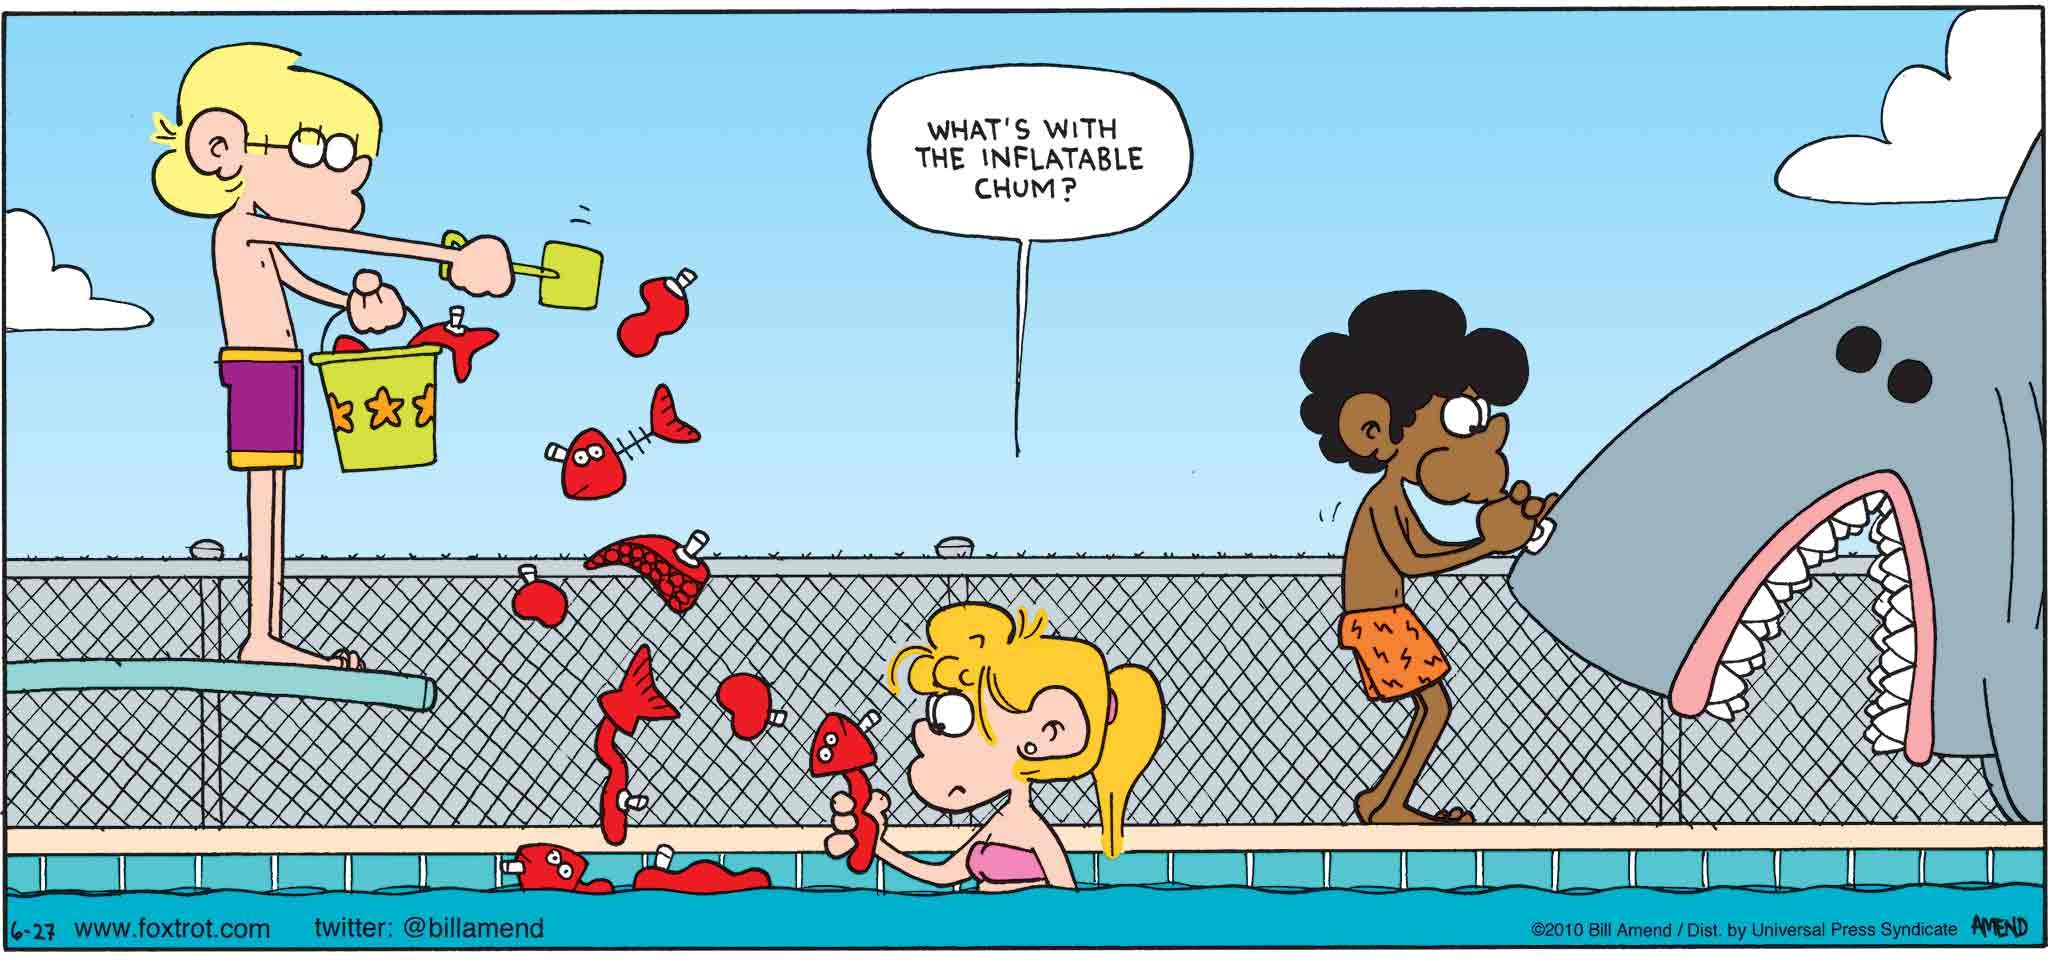 FoxTrot by Bill Amend June 27, 2010 - Summer Comics - Paige: What's with the inflatable chum?